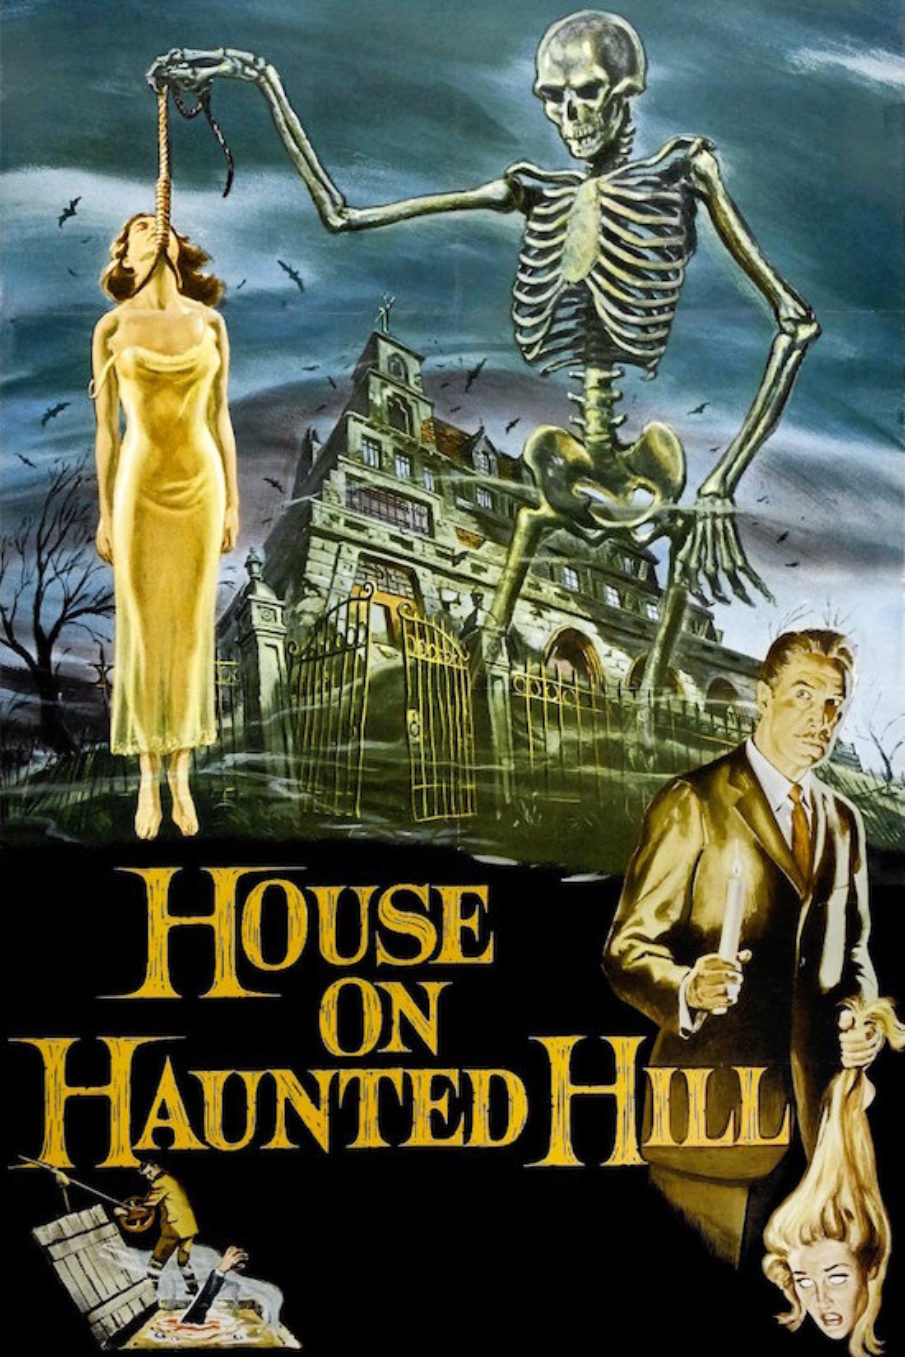 House on Haunted Hill (1959) – 31 Days of Halloween